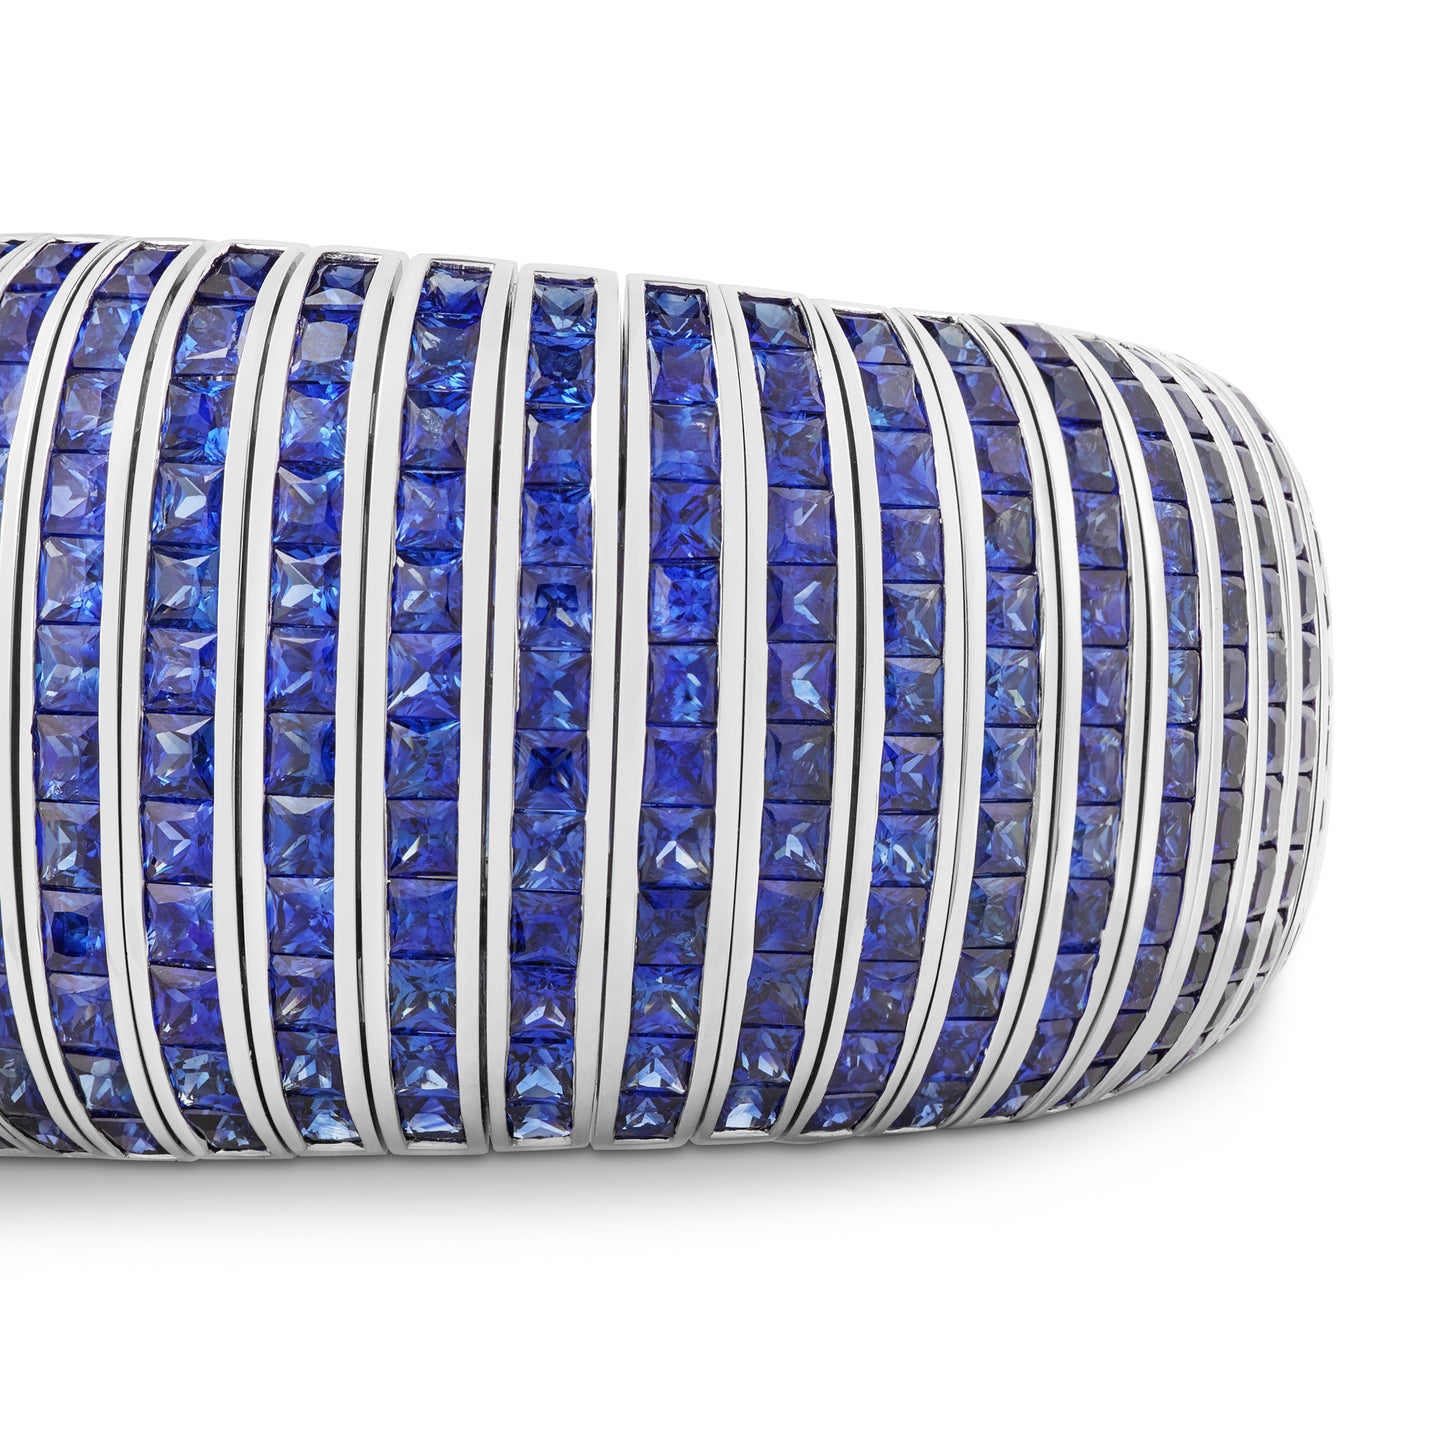 Deco Bangle in 18ct White Gold with Sapphire